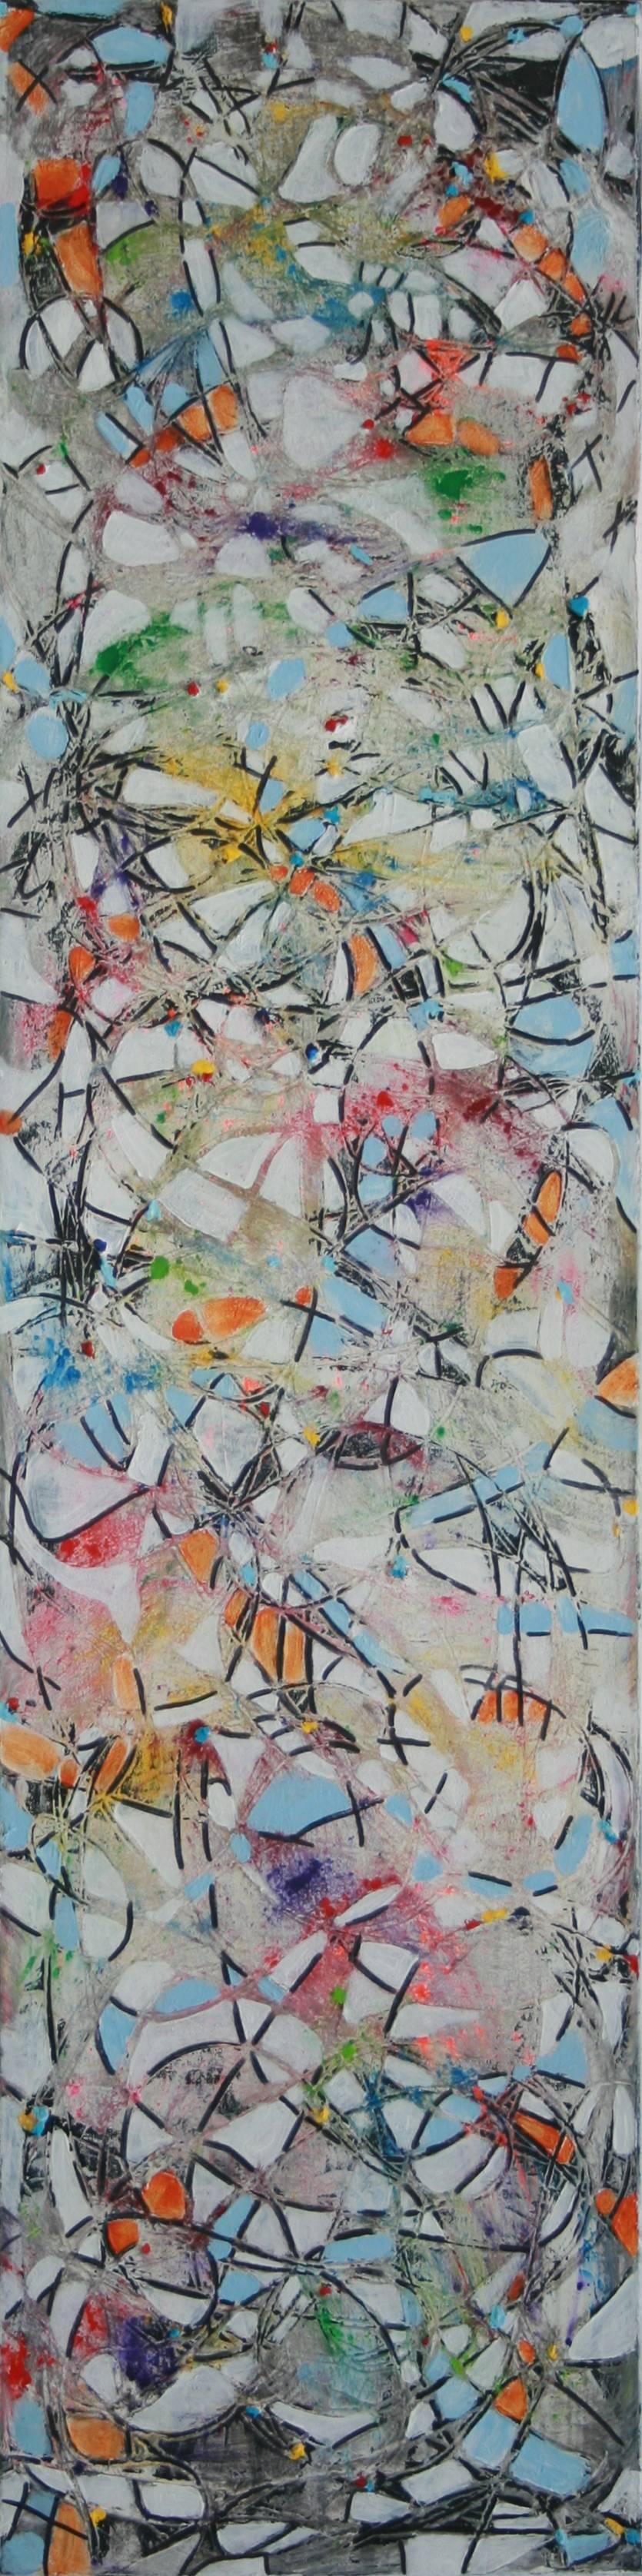 Petra Rös-Nickel Abstract Painting - "Organic White" - Original Oil and Mixed Media Painting